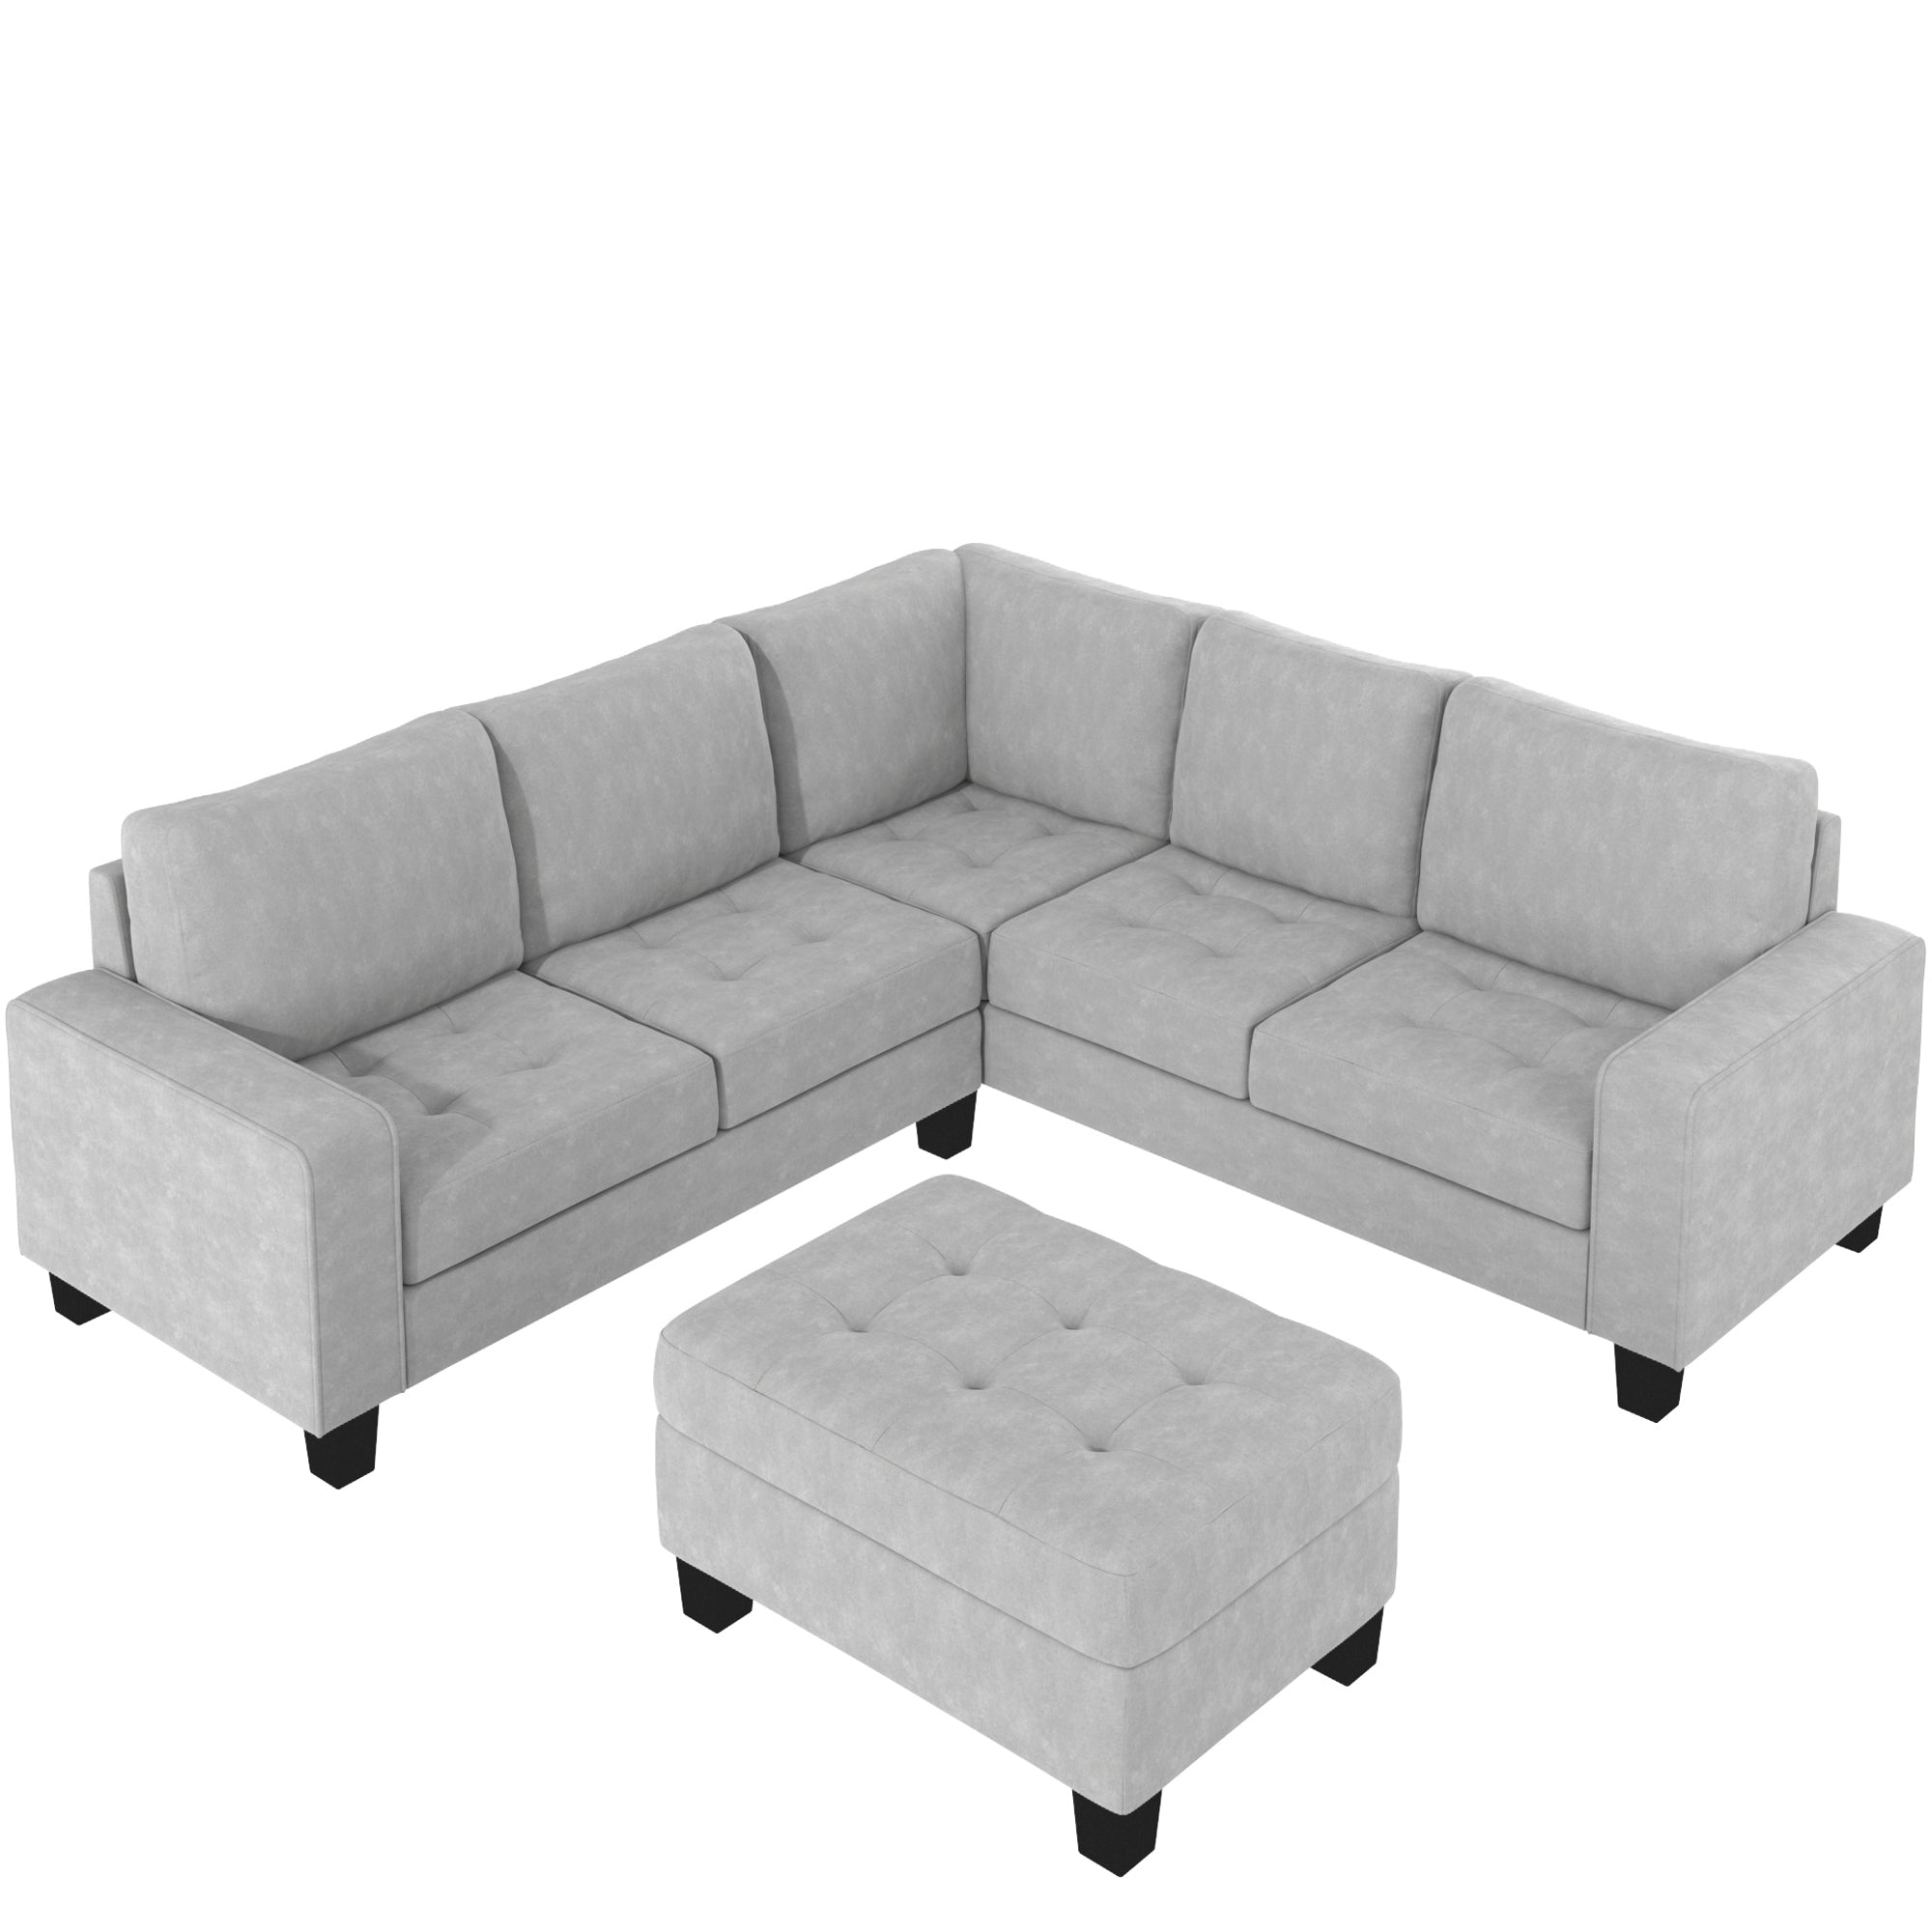 gray-l-shaped-sectional-couch